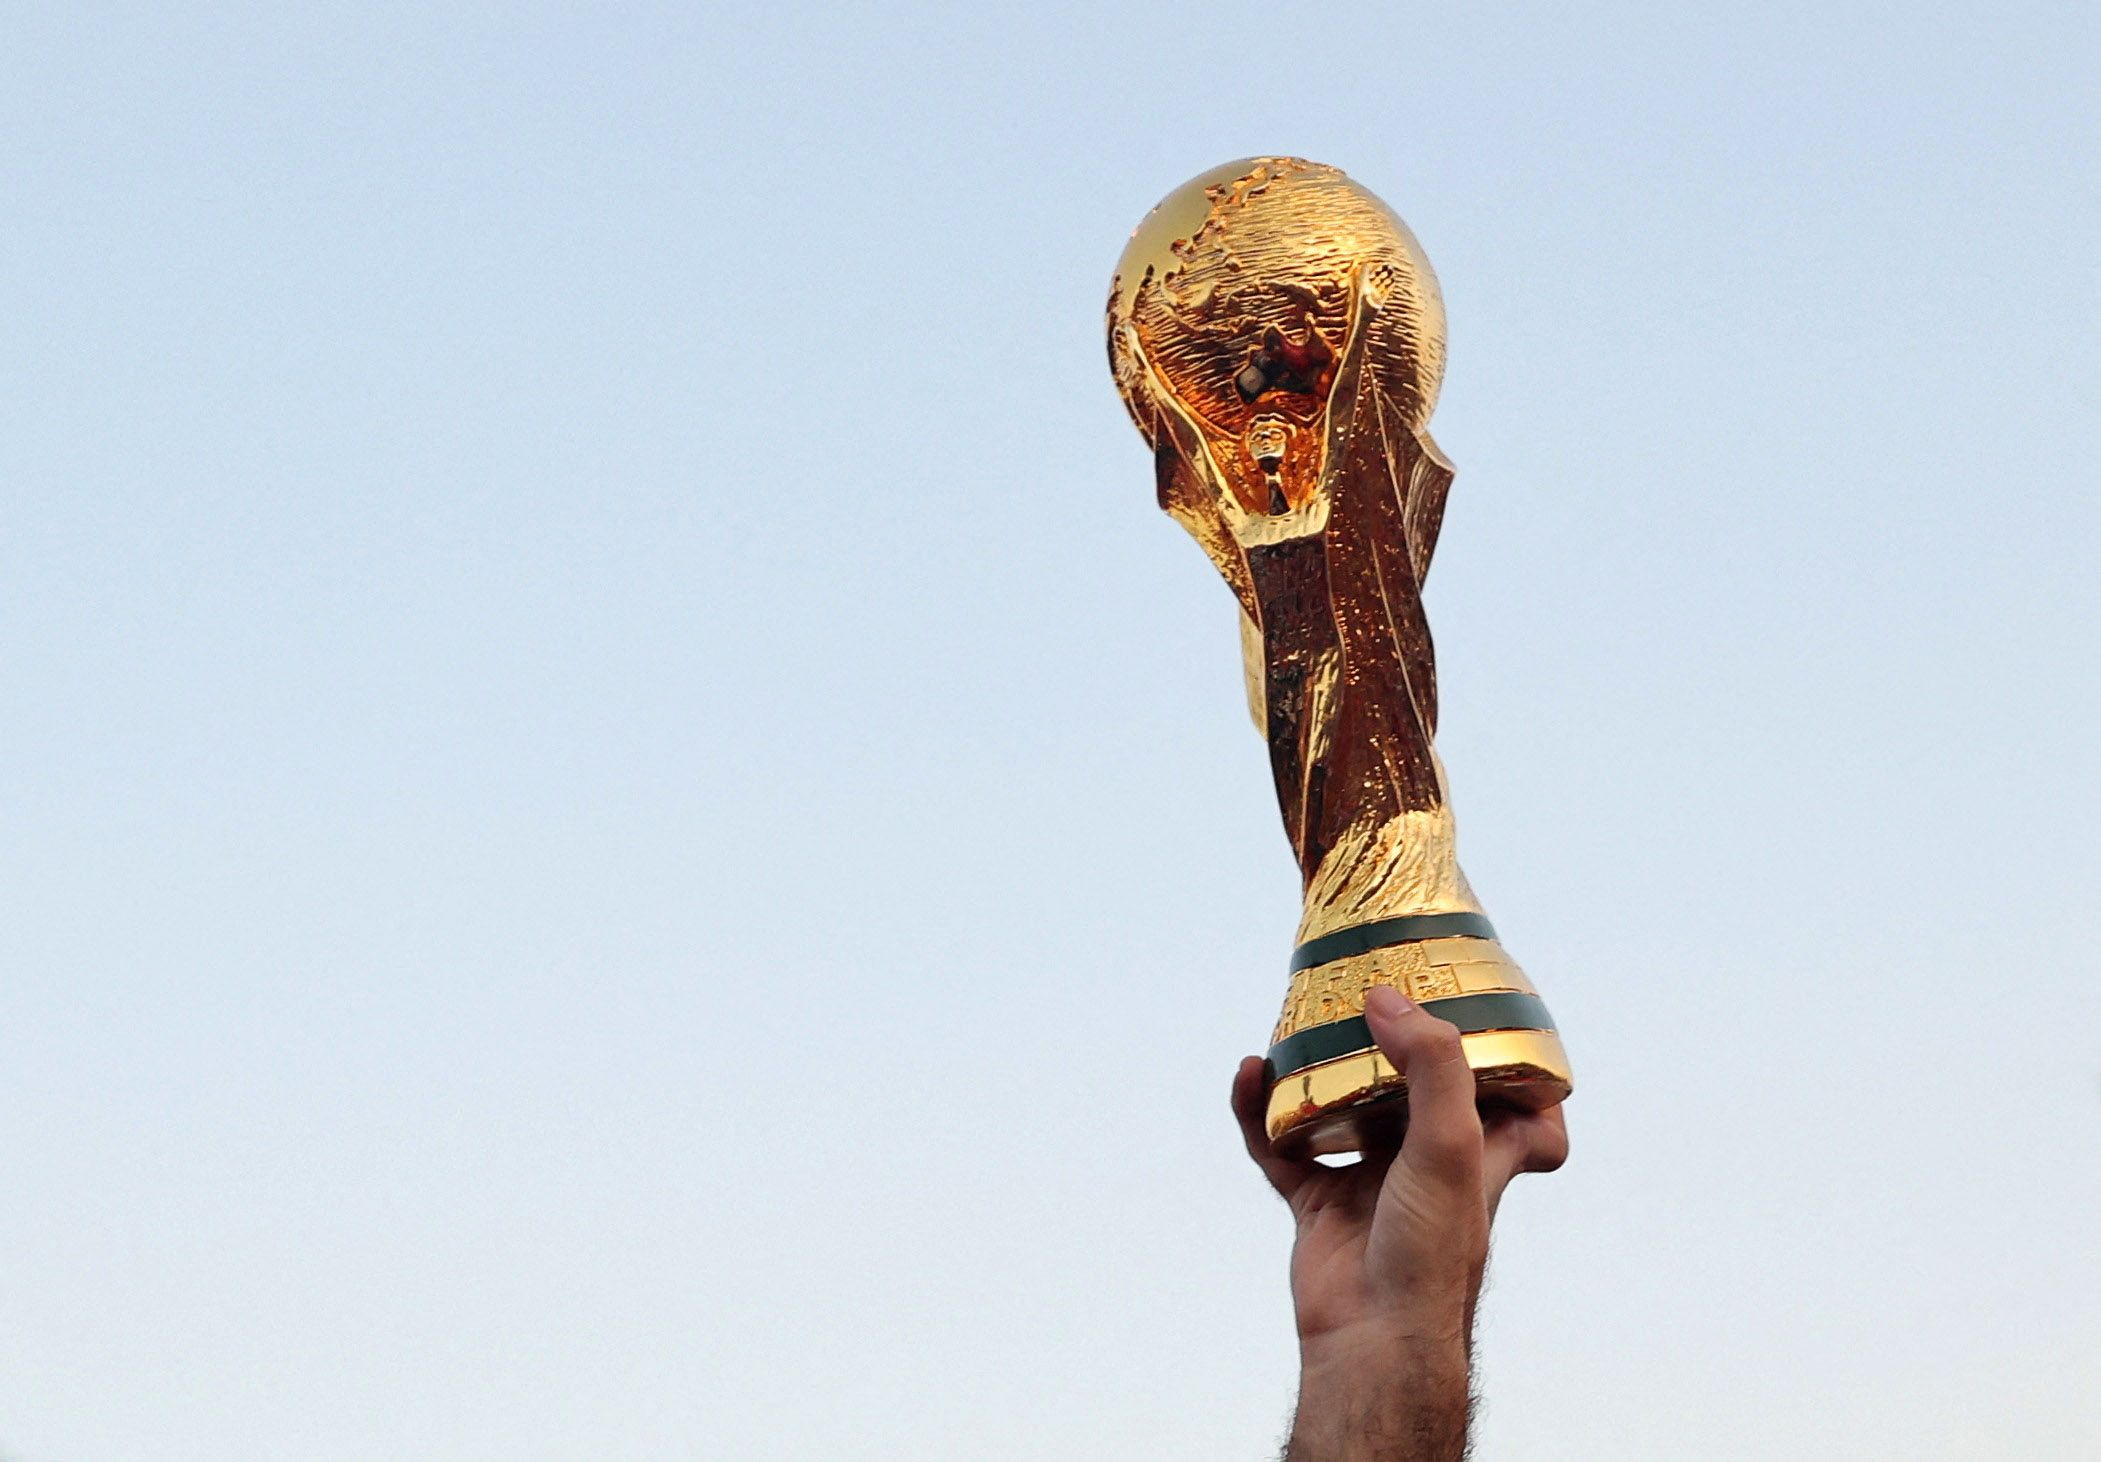 Everton World Cup quiz: How well do you know the club’s WC history? -Everton